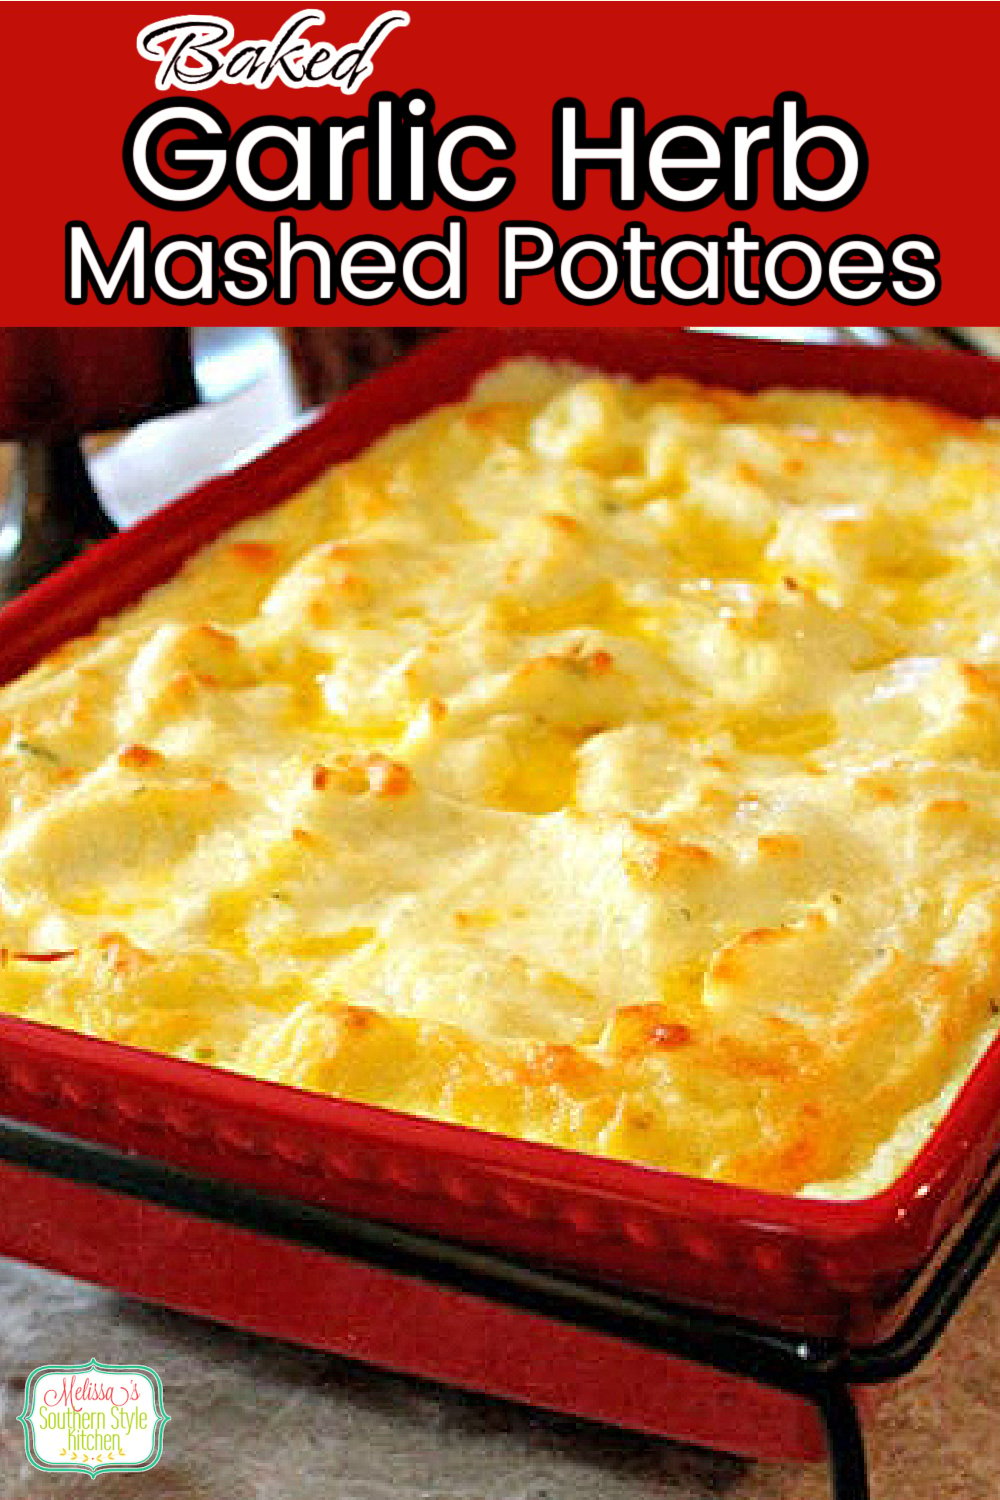 These dreamy Garlic Herb Mashed Potatoes can be assembled in advance then baked just before serving #makeaheadmashedpotatoes #mashedpotatoes #garlicherbmashedpotatoes #potatorecipes #potatocasserole #potatoes #garlicherbpotatoes #holidaysidedishrecipes #thanksgivingrecipes #easterrecipes #christmasrecipes #southernfood #southernrecipes